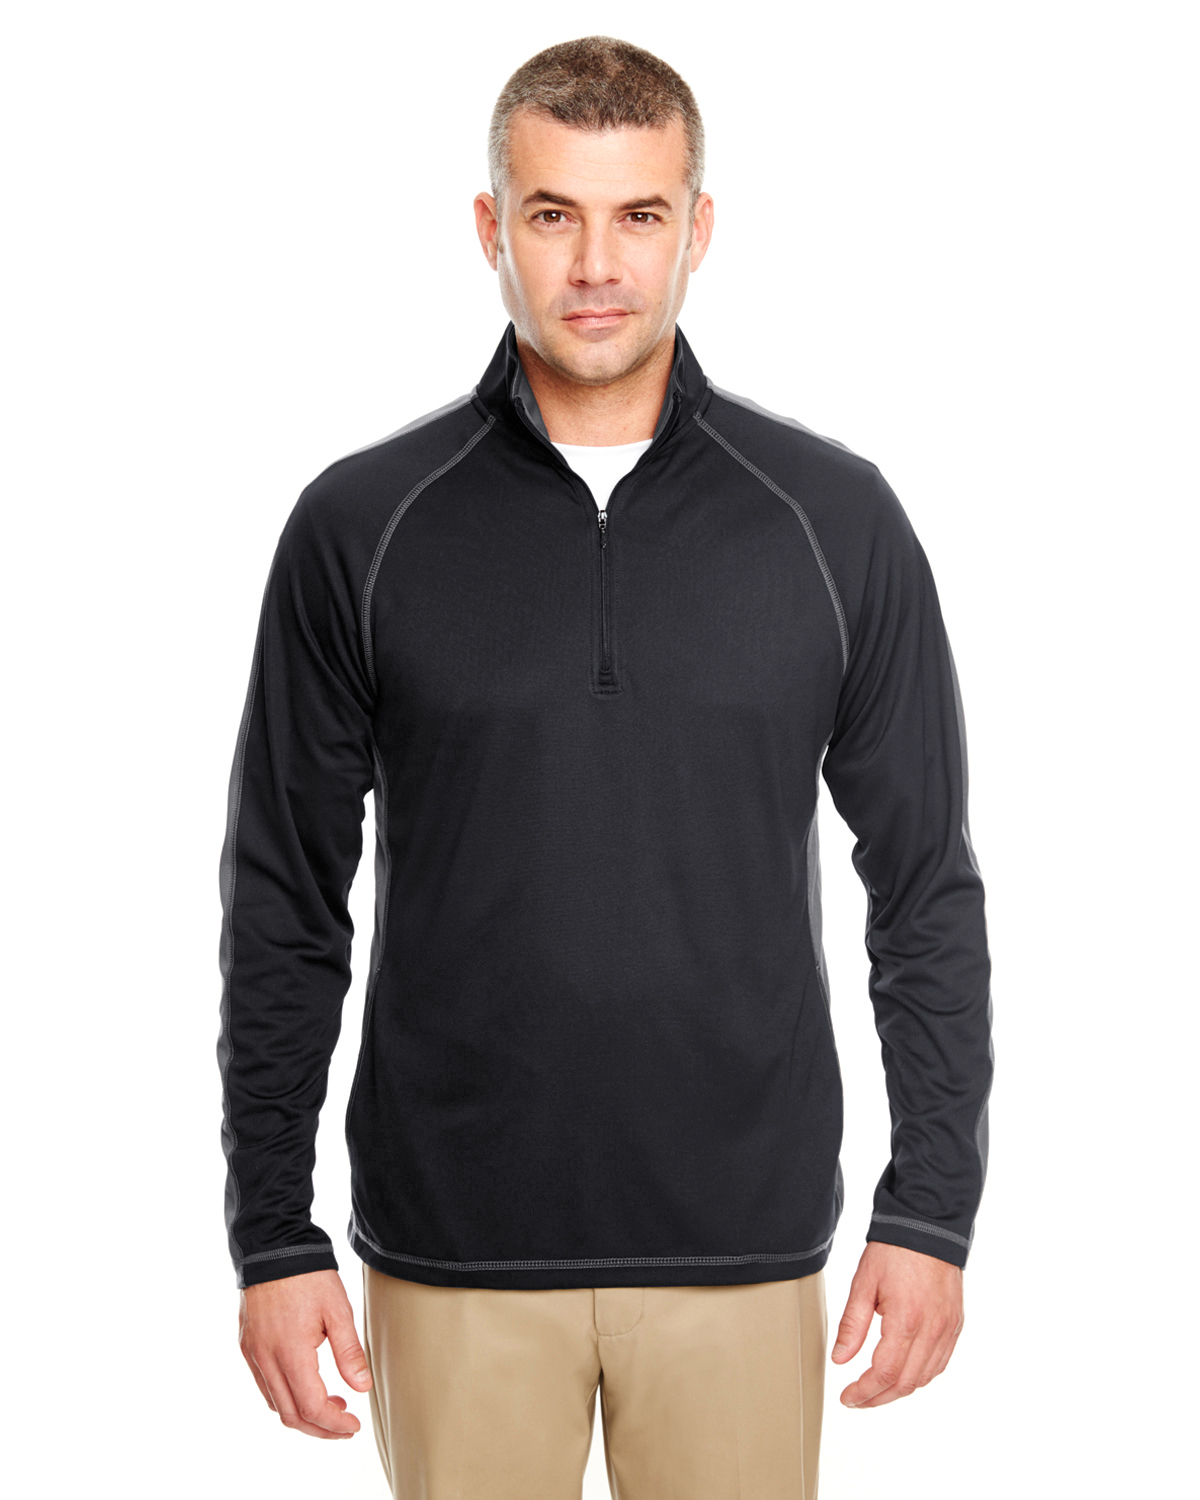 UltraClub Adult Cool & Dry Sport Quarter-Zip Pullover with Side and Sleeve Panels